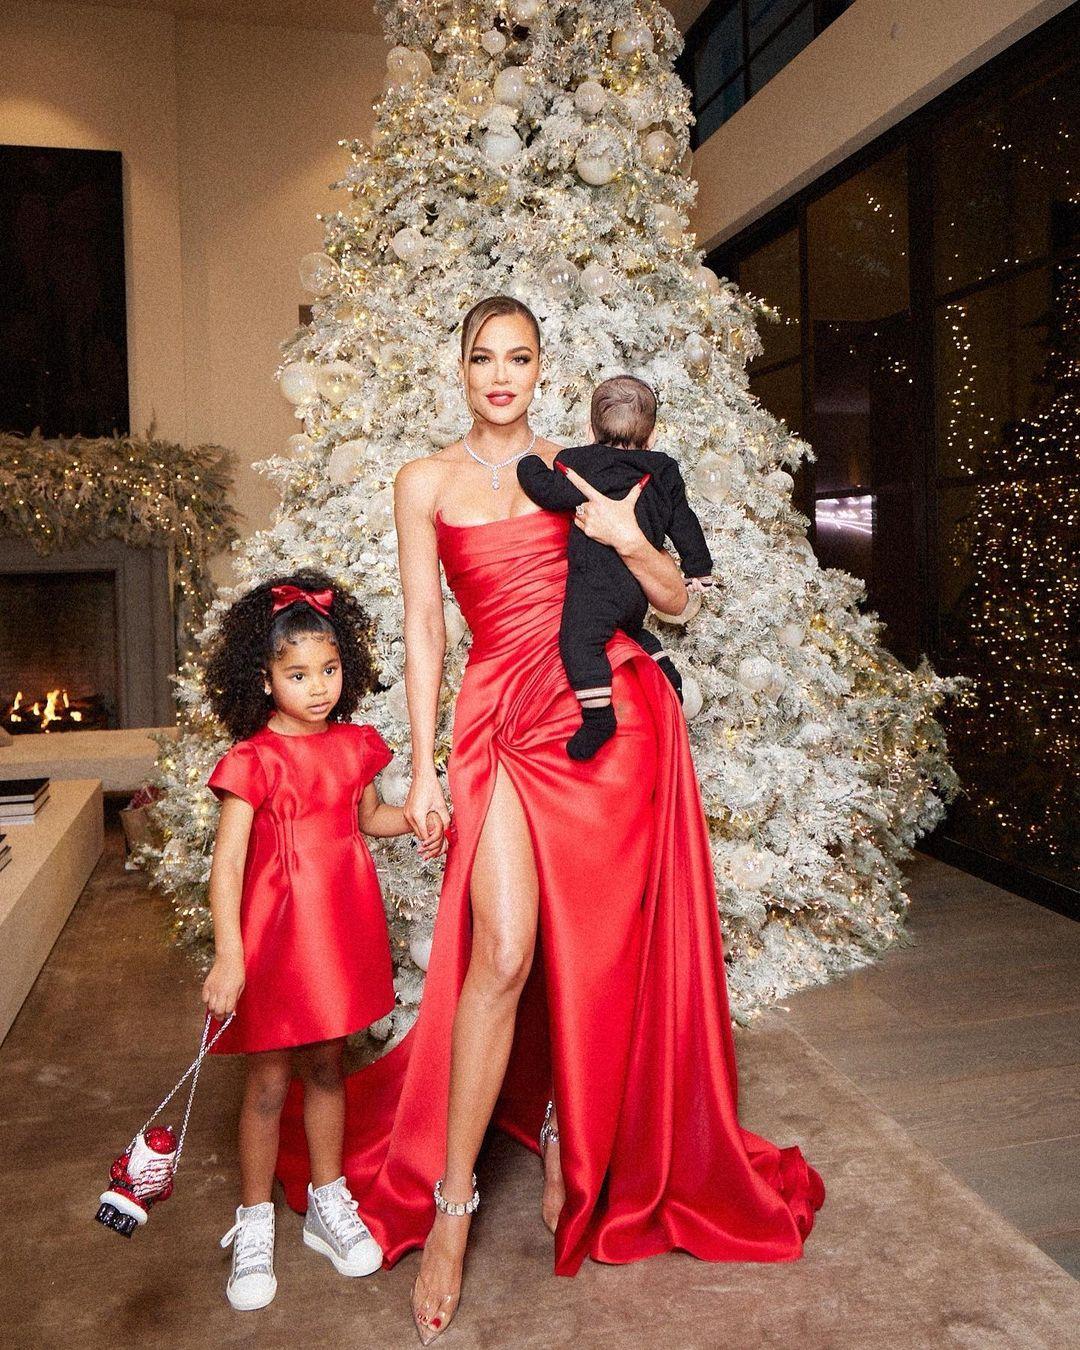 Khloe Kardashian Shares New Pics Of Son & True For The Holidays Without Tristan Thompson